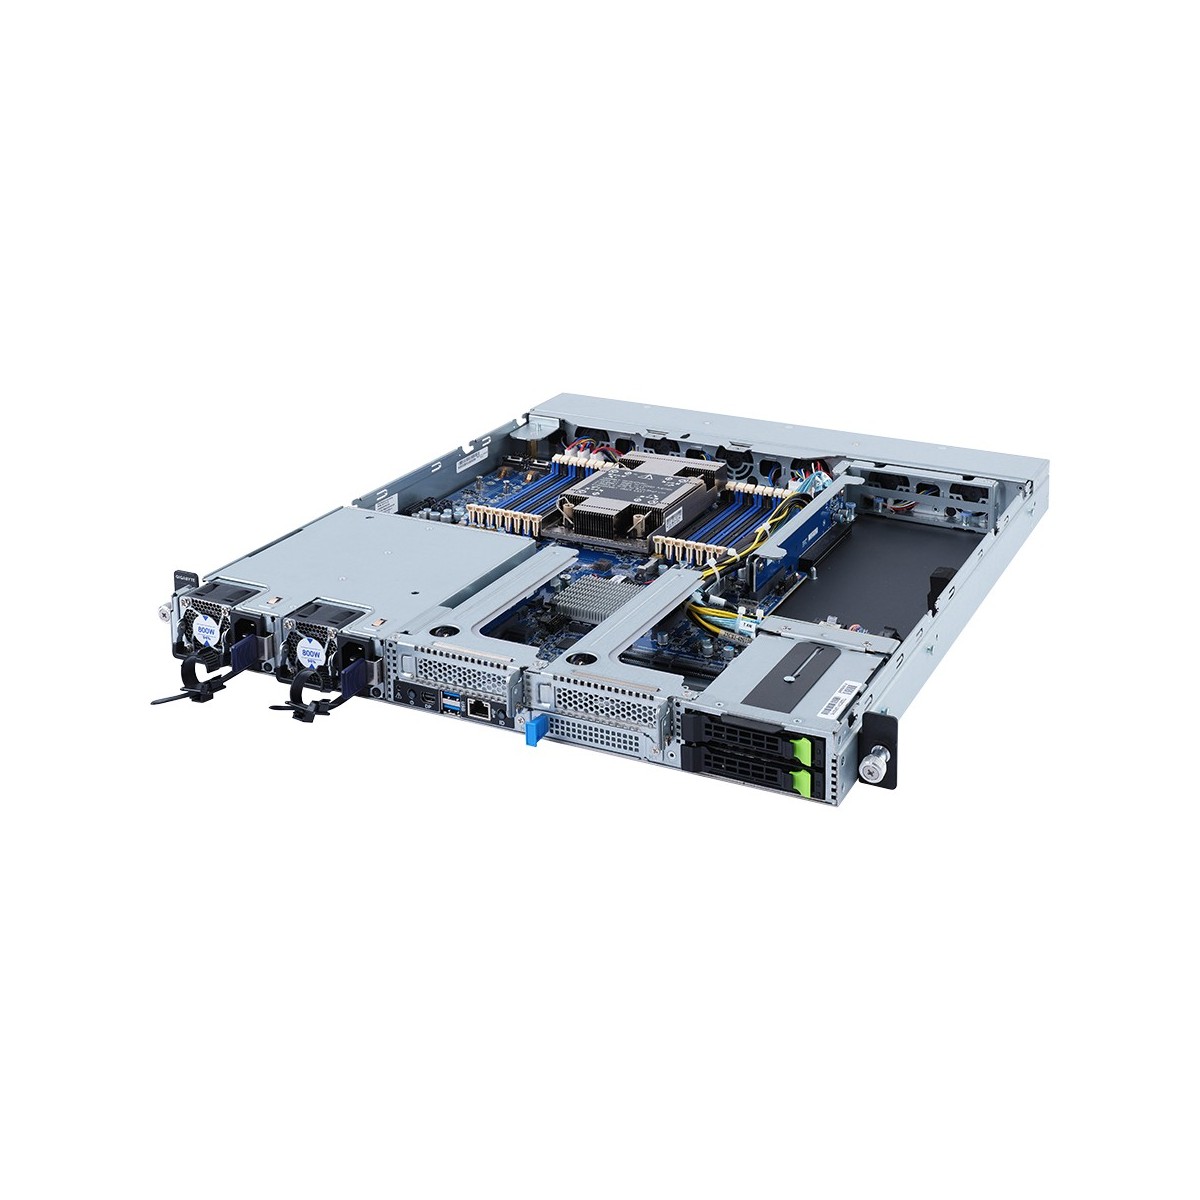 Gigabyte E162-220 1U UP system with GPU supported